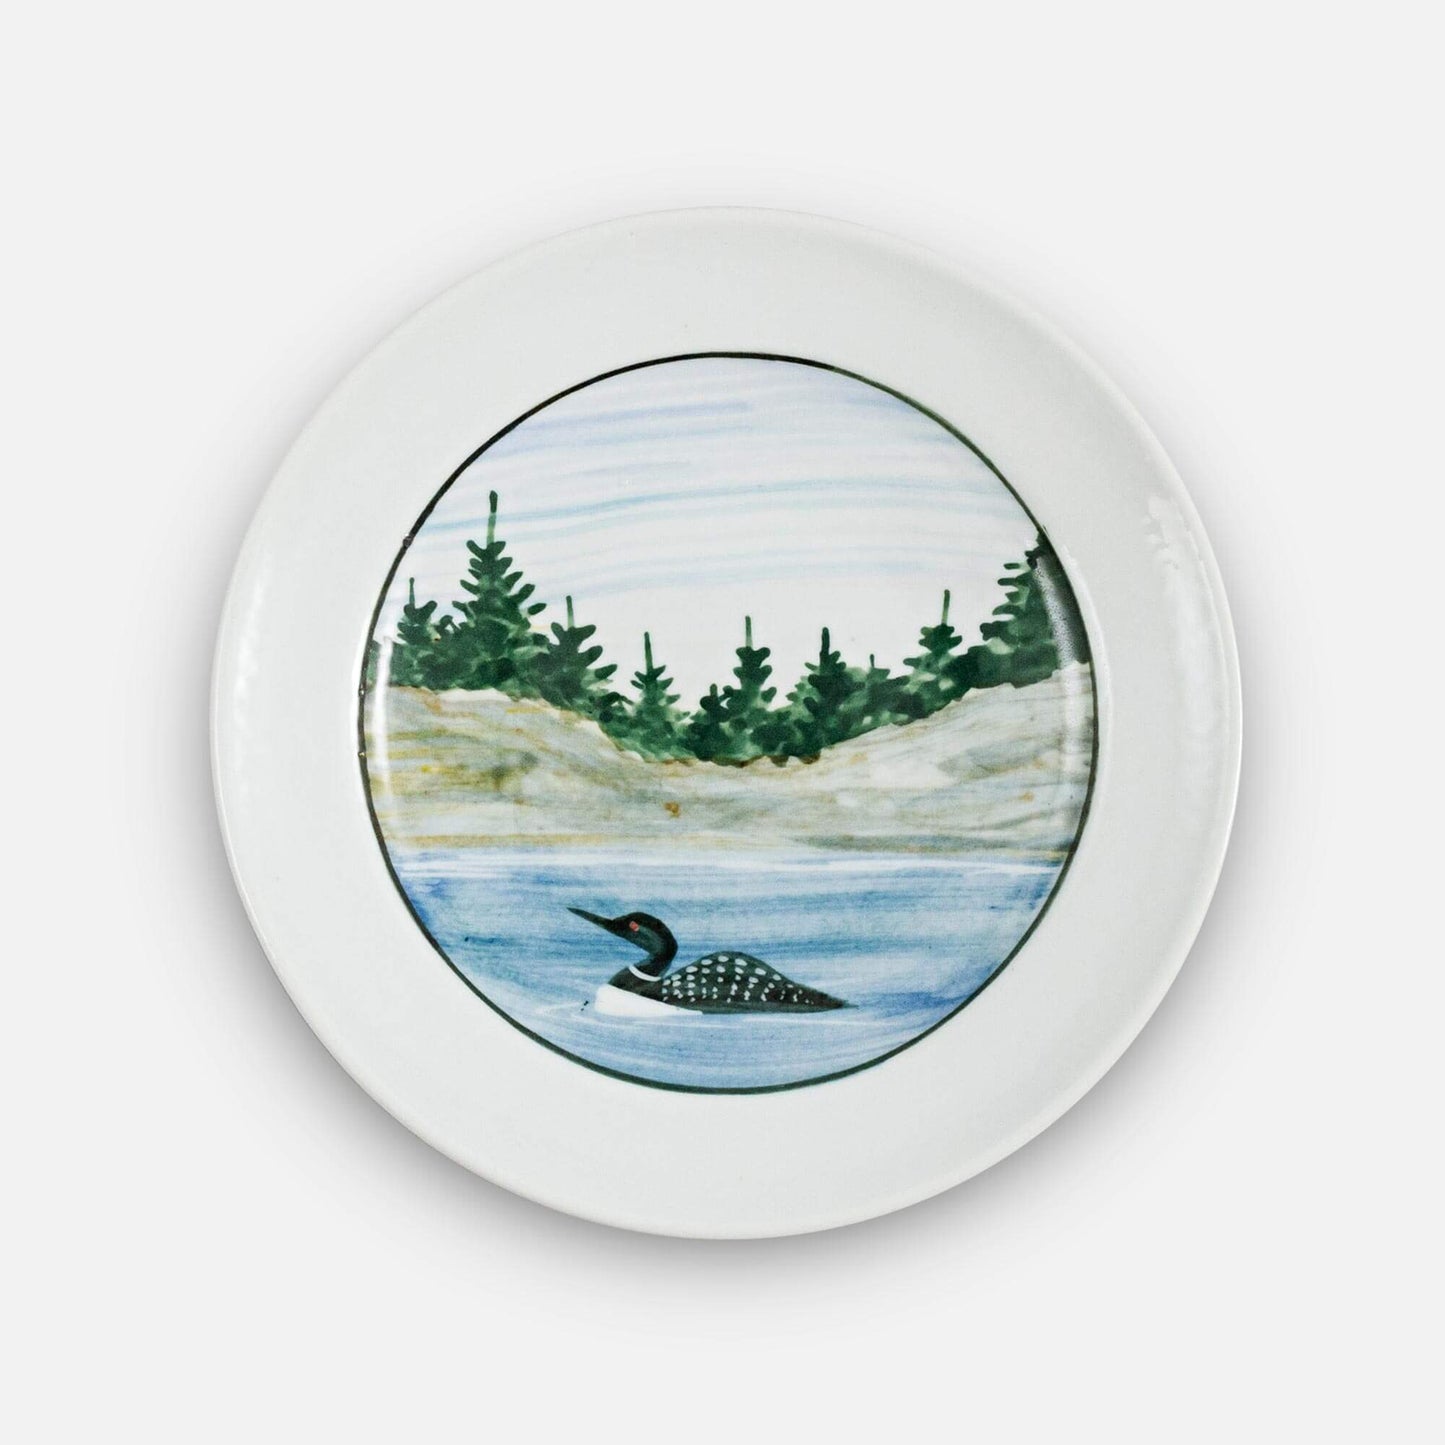 Handmade Pottery Classic Dessert Plate in Loon pattern made by Georgetown Pottery in Maine